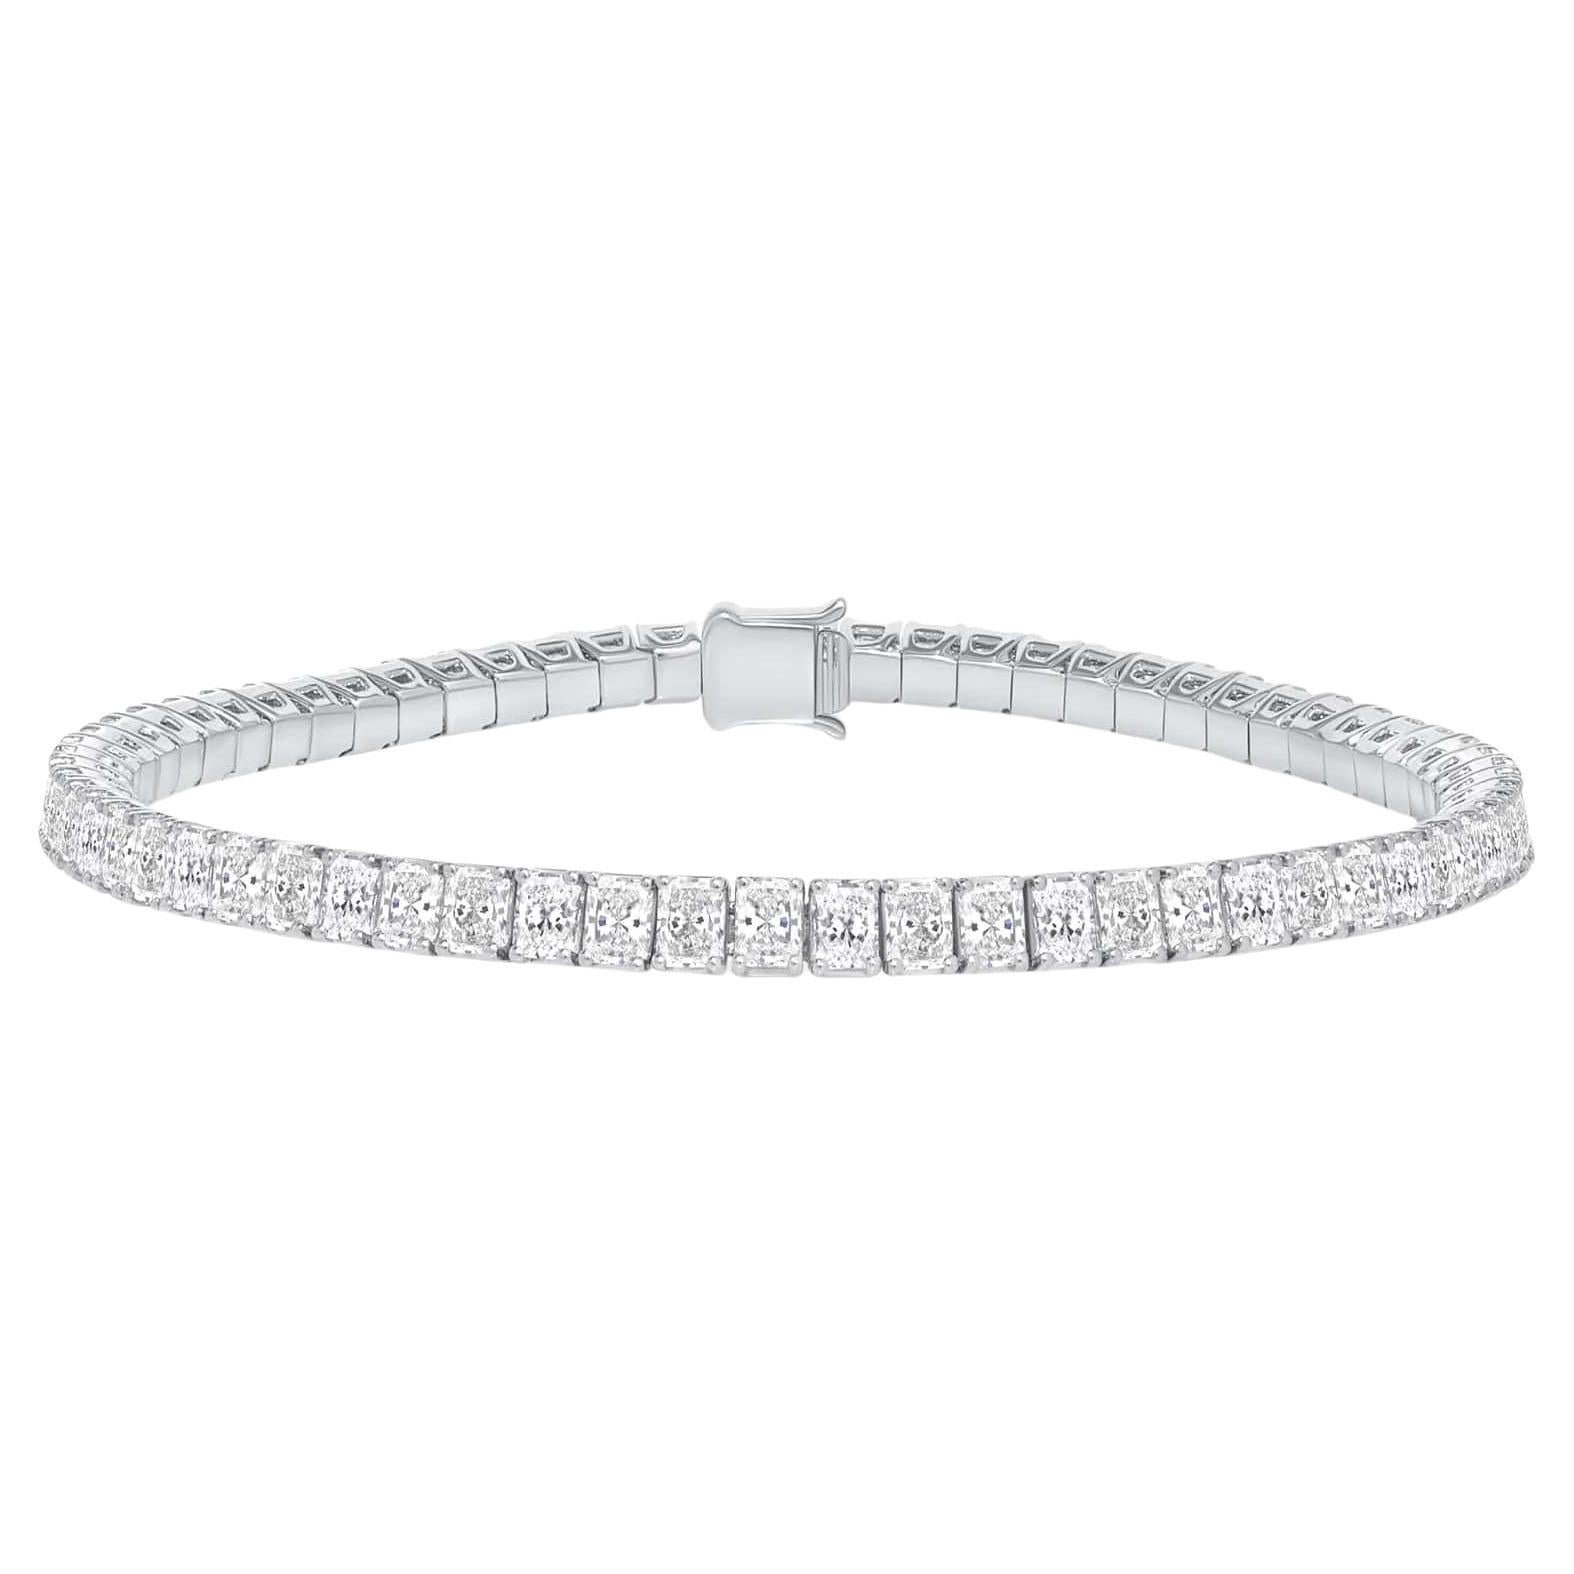 A beautiful and unique diamond cut, this radiant bracelet is to compliment any outfit.

Bracelet Information 
Metal : 18k Gold
Diamond Cut : Radiant Cut Natural Conflict Free Diamond 
Diamond Carat Weight : 6ttcw
Diamond Clarity : VS -SI
Diamond